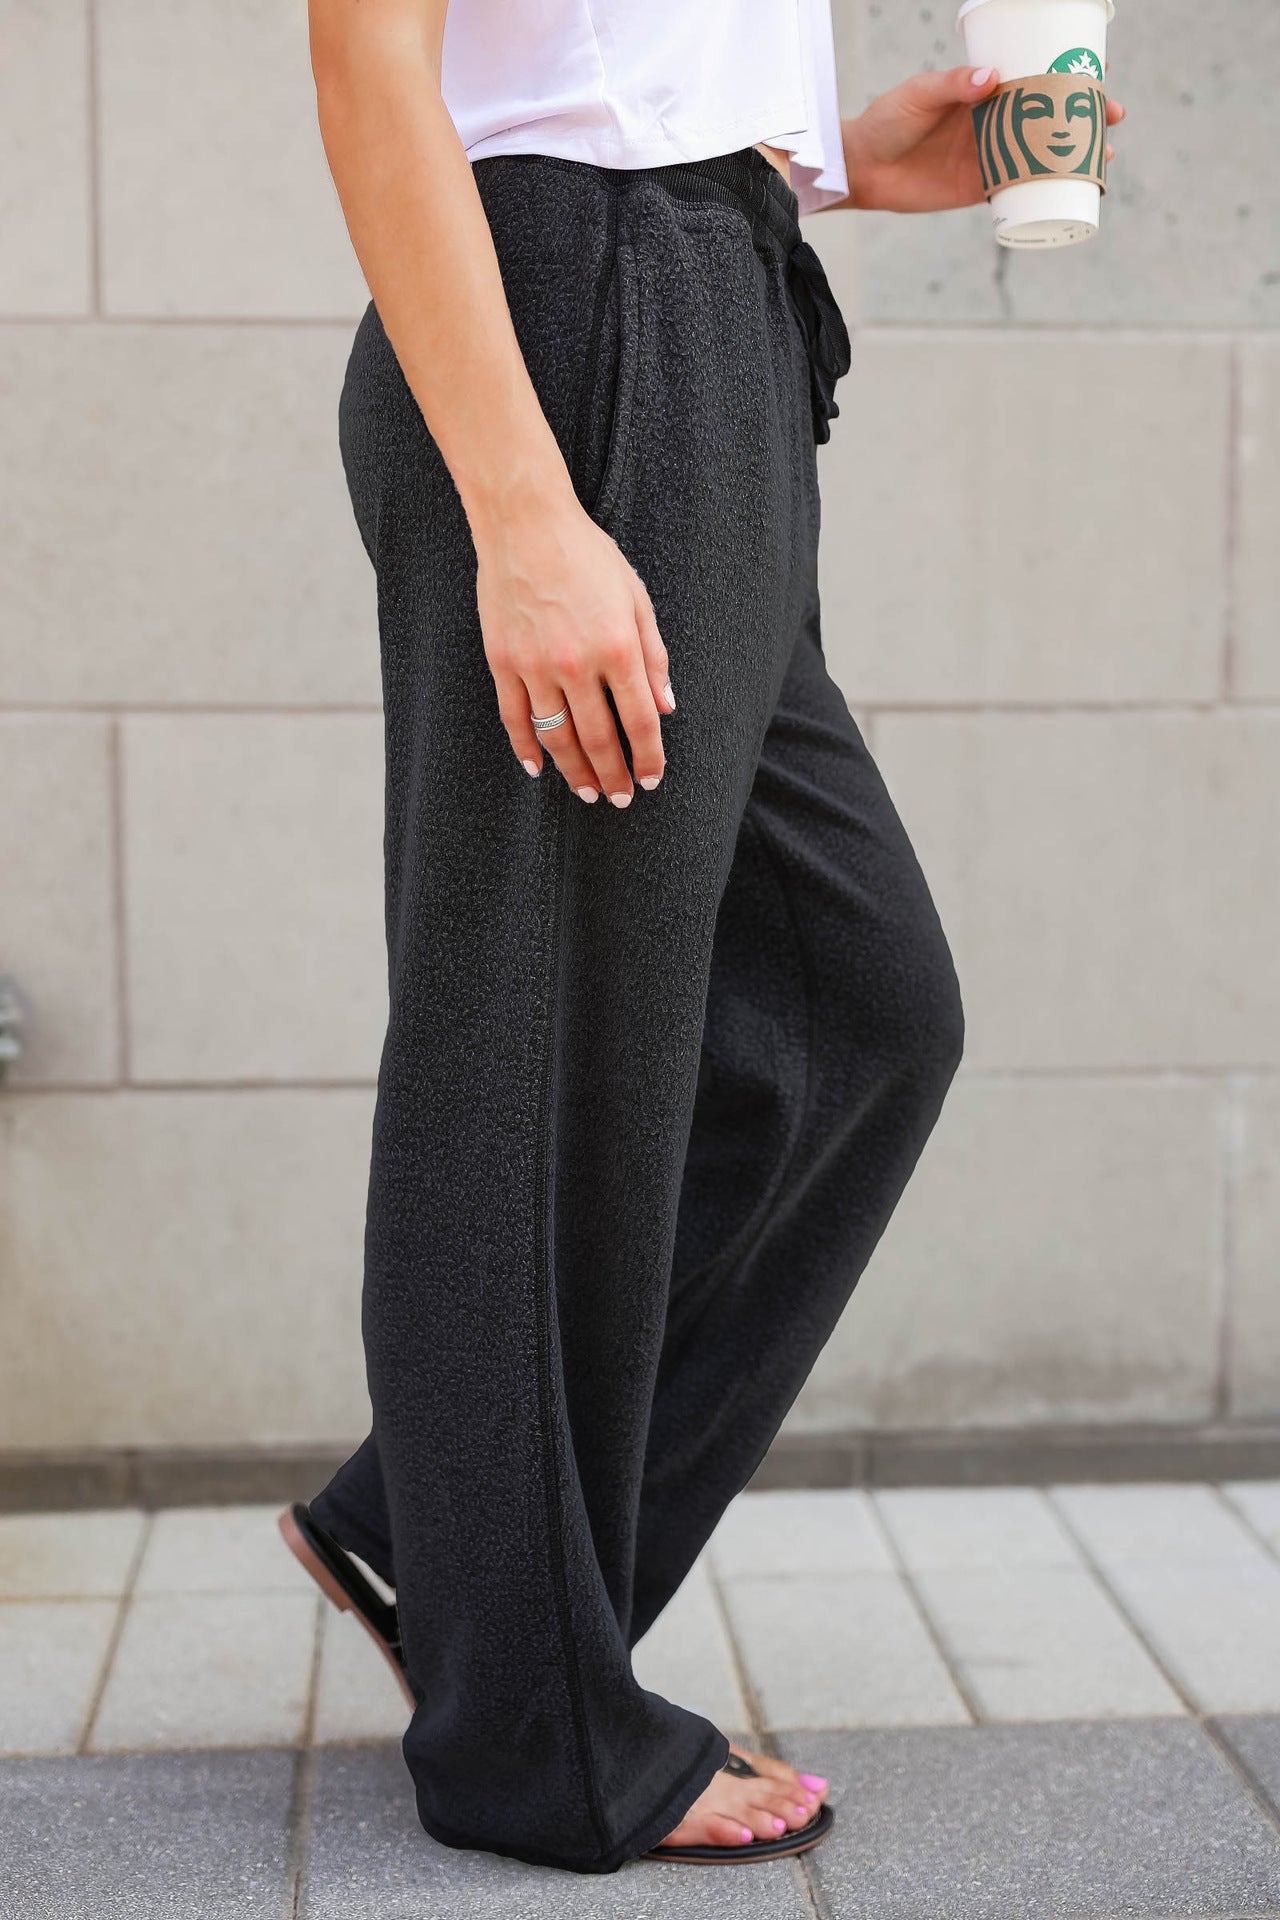 Autumn and winter furry loose home casual pants